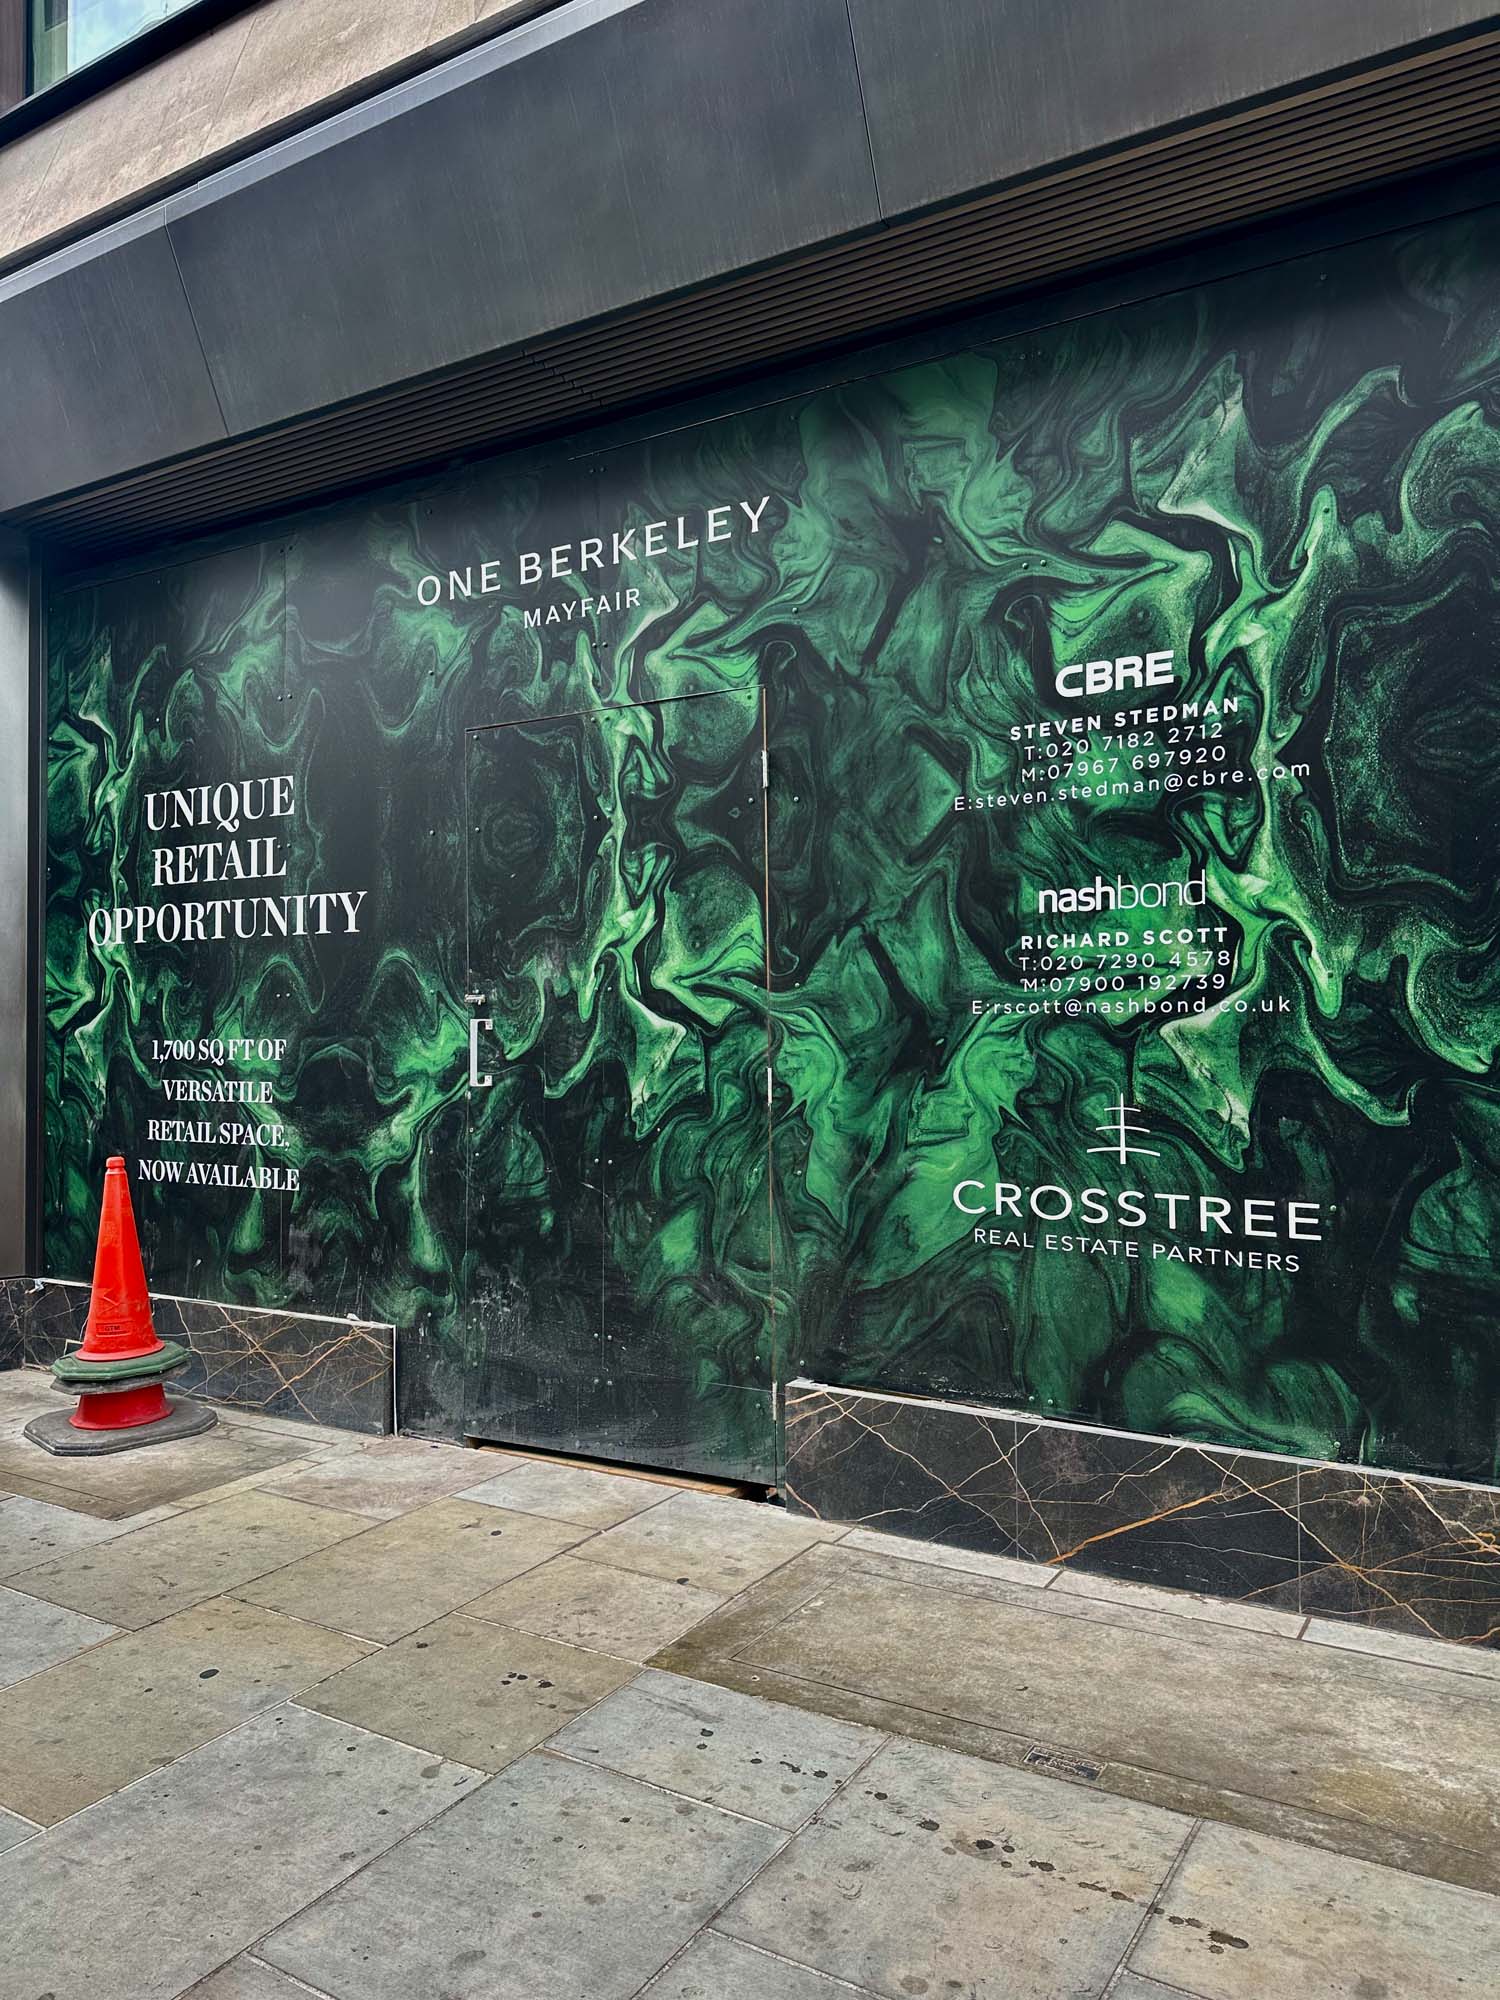 Unique retail opportunity at One Berkeley